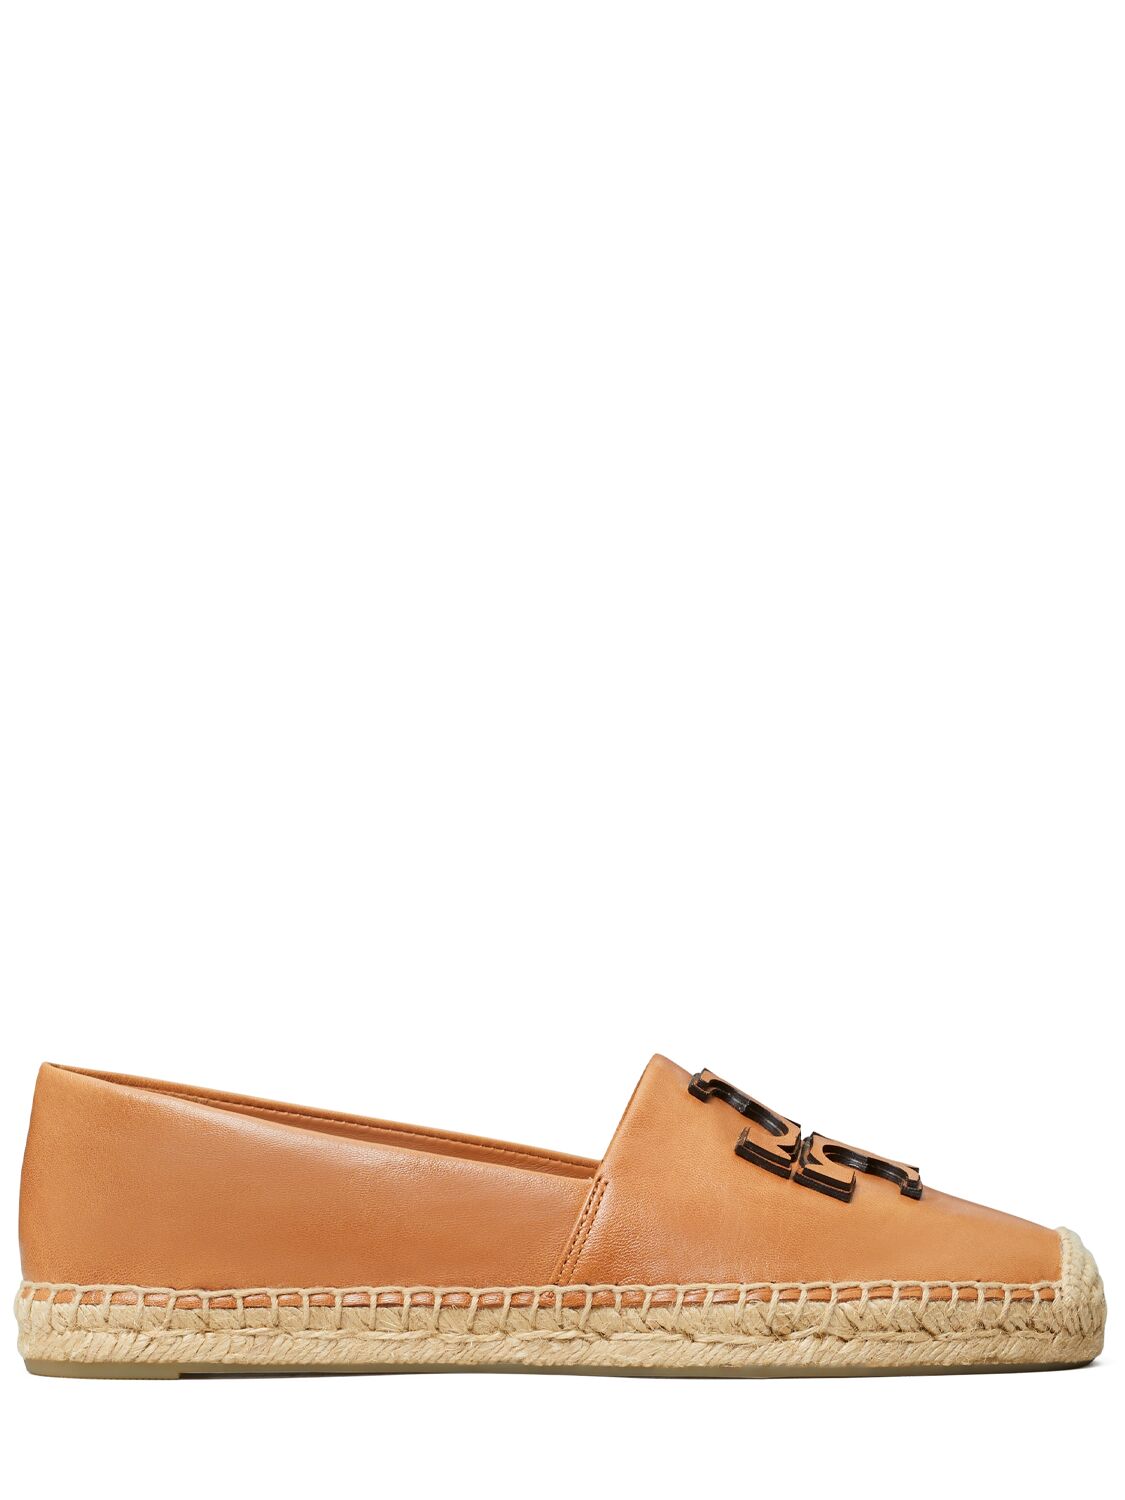 Image of 20mm Ines Leather Espadrilles